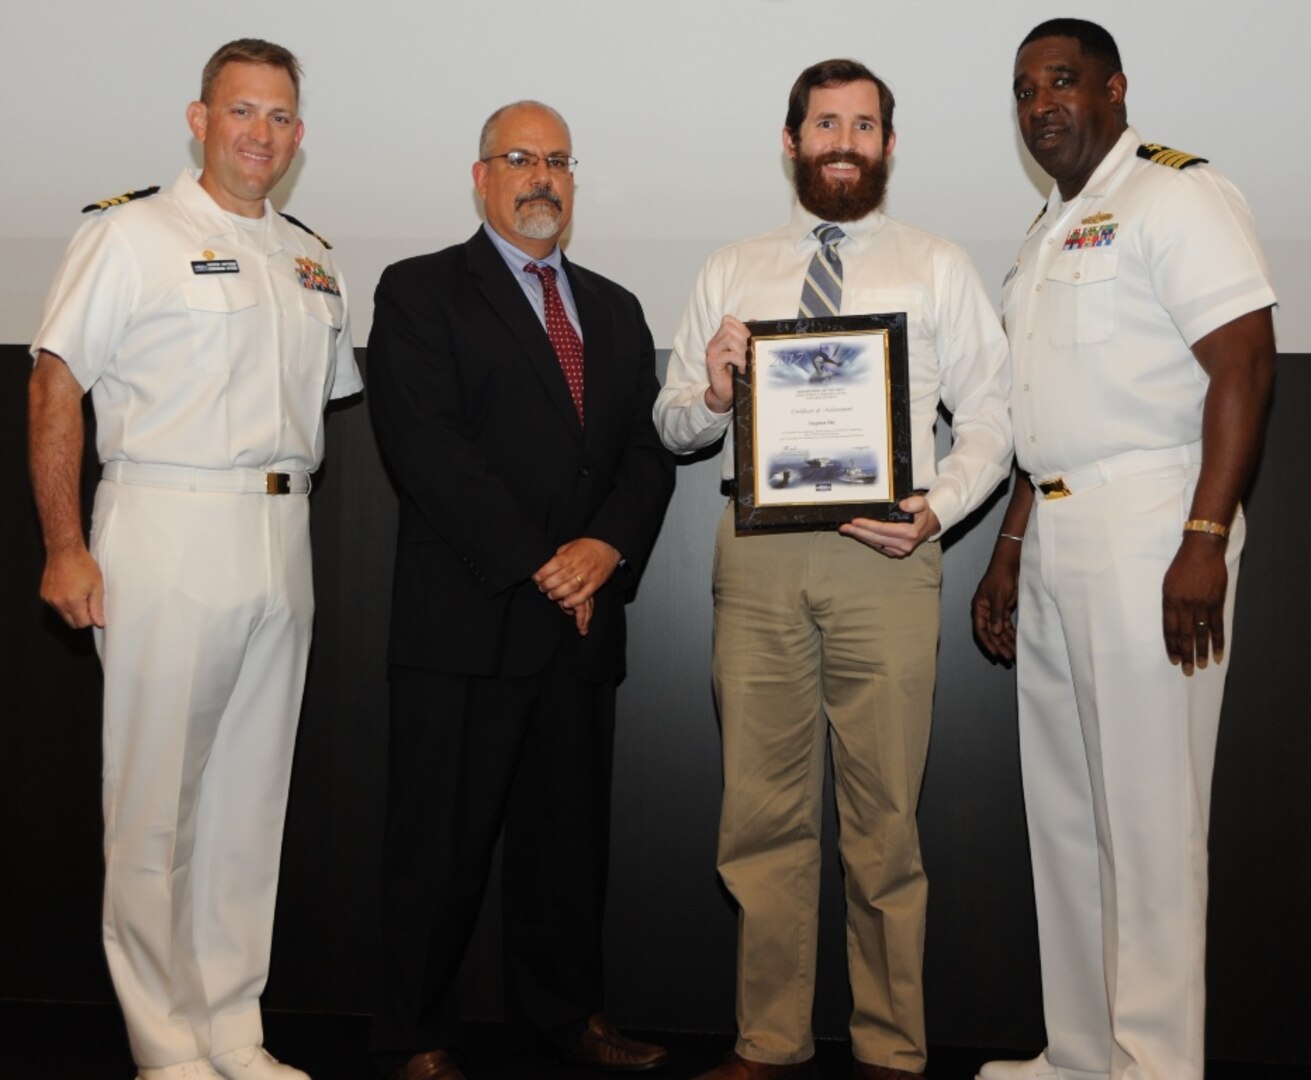 IMAGE: DAHLGREN, Va. - Stephen Dix receives his certificate of achievement from Naval Surface Warfare Center Dahlgren Division (NSWCDD) Technical Director John Fiore, NSWCDD Commanding Officer Capt. Godfrey 'Gus' Weekes, right, and Combat Direction Systems Activity Dam Neck Commanding Officer Cmdr. Andrew Hoffman at the 2017 NSWCDD academic awards ceremony. Dix was recognized for completing his master's in mechanical engineering from Old Dominion University, and commended for his commitment to personal and professional development.